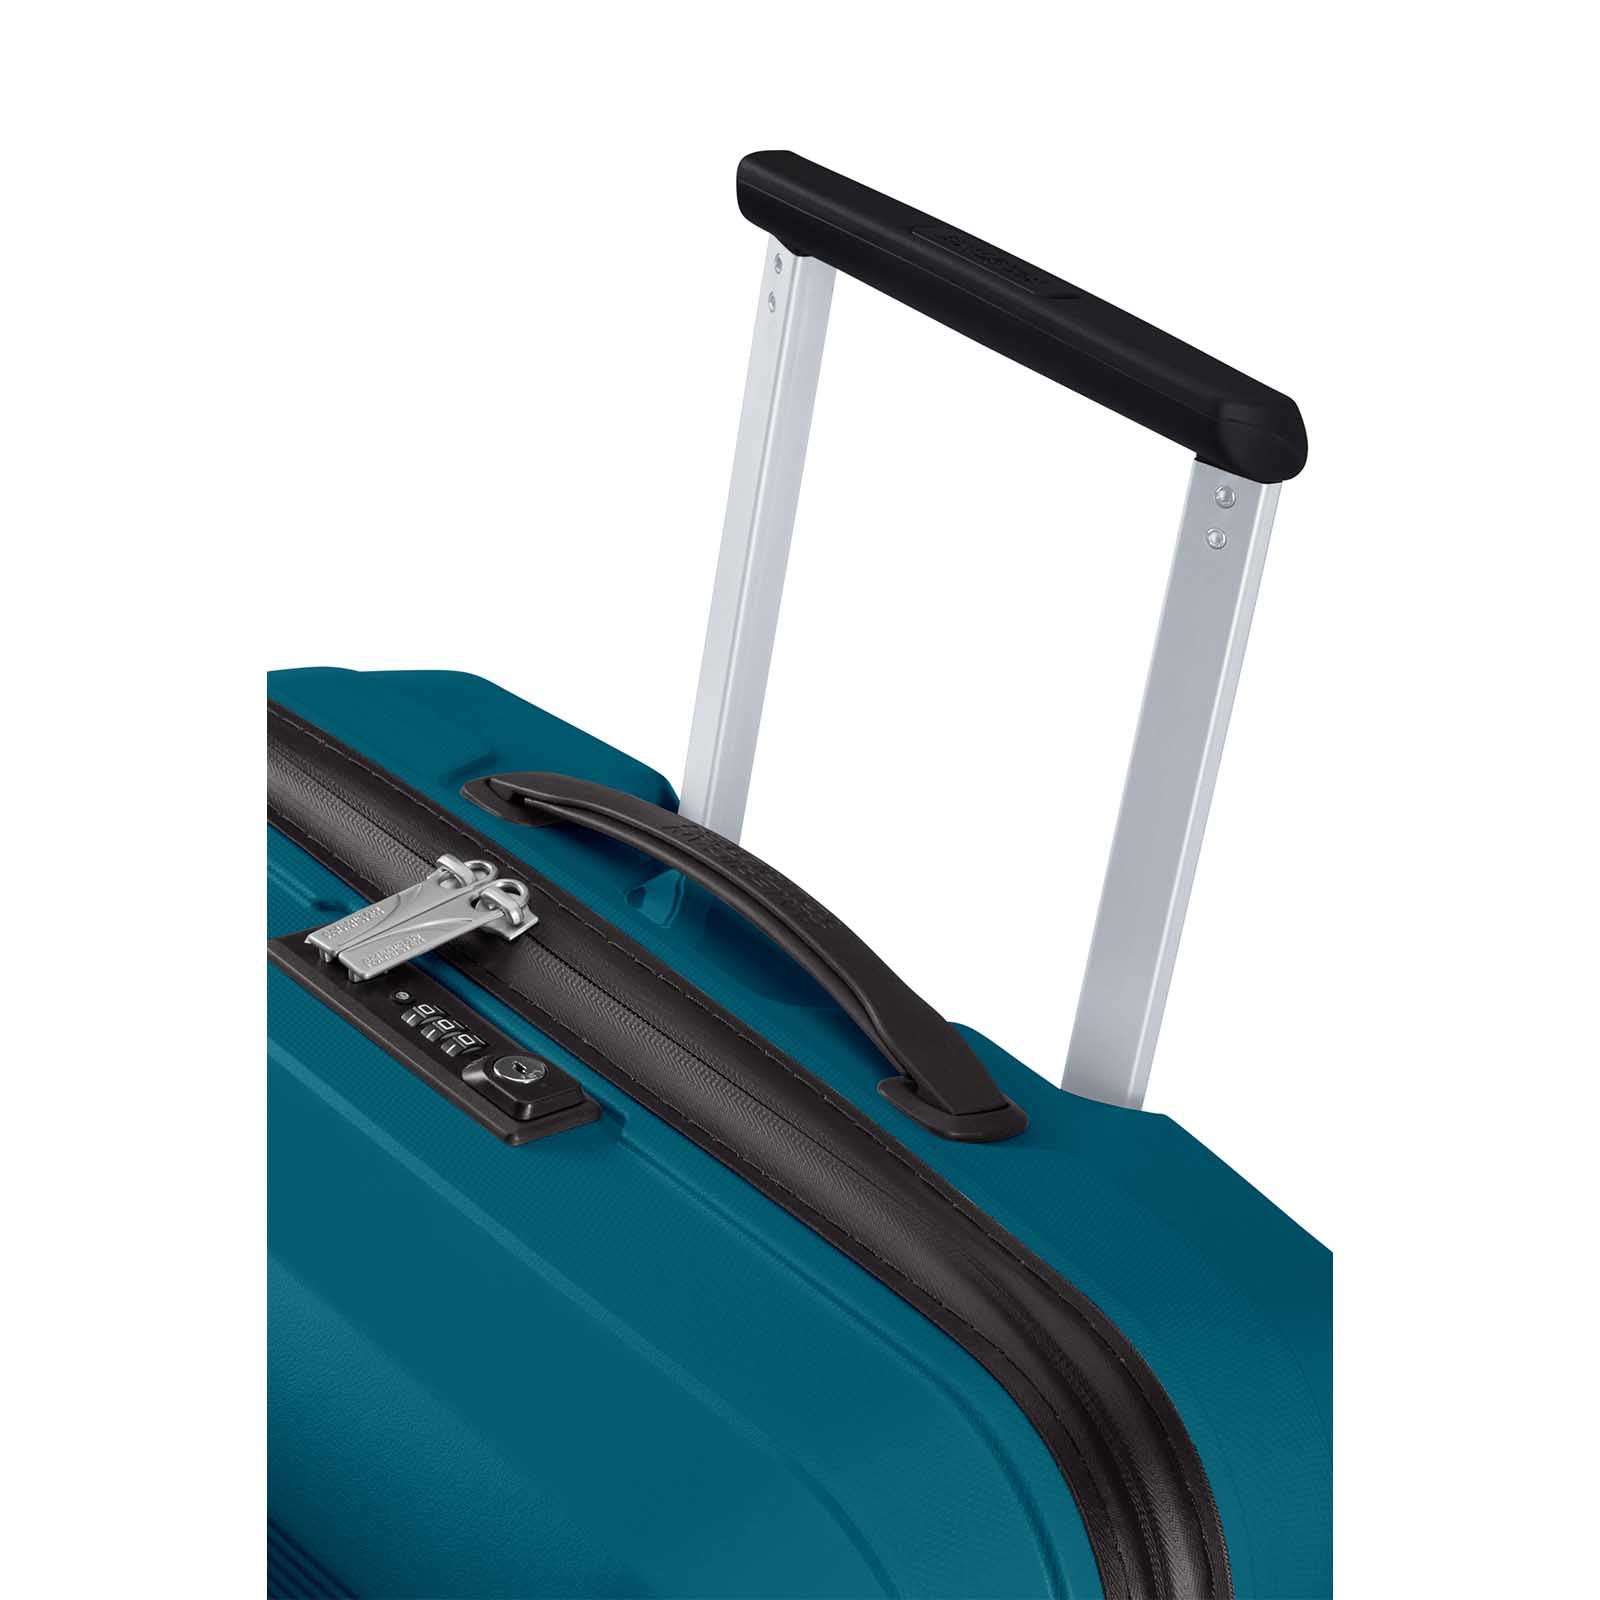 American-Tourister-Airconic-77cm-Suitcase-Deep-Ocean-Trolley